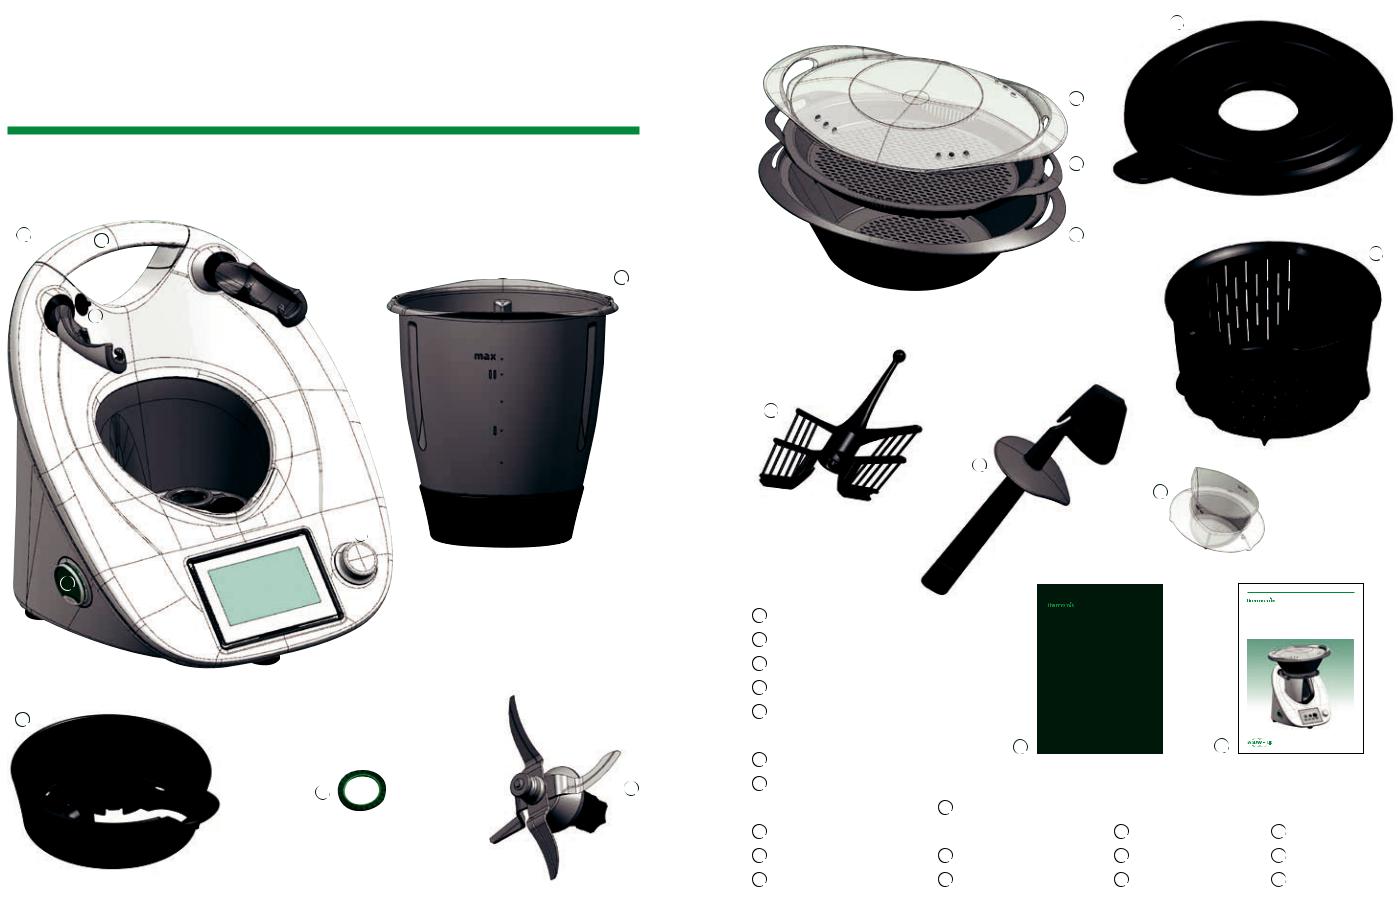 Thermomix TM5 User Manual